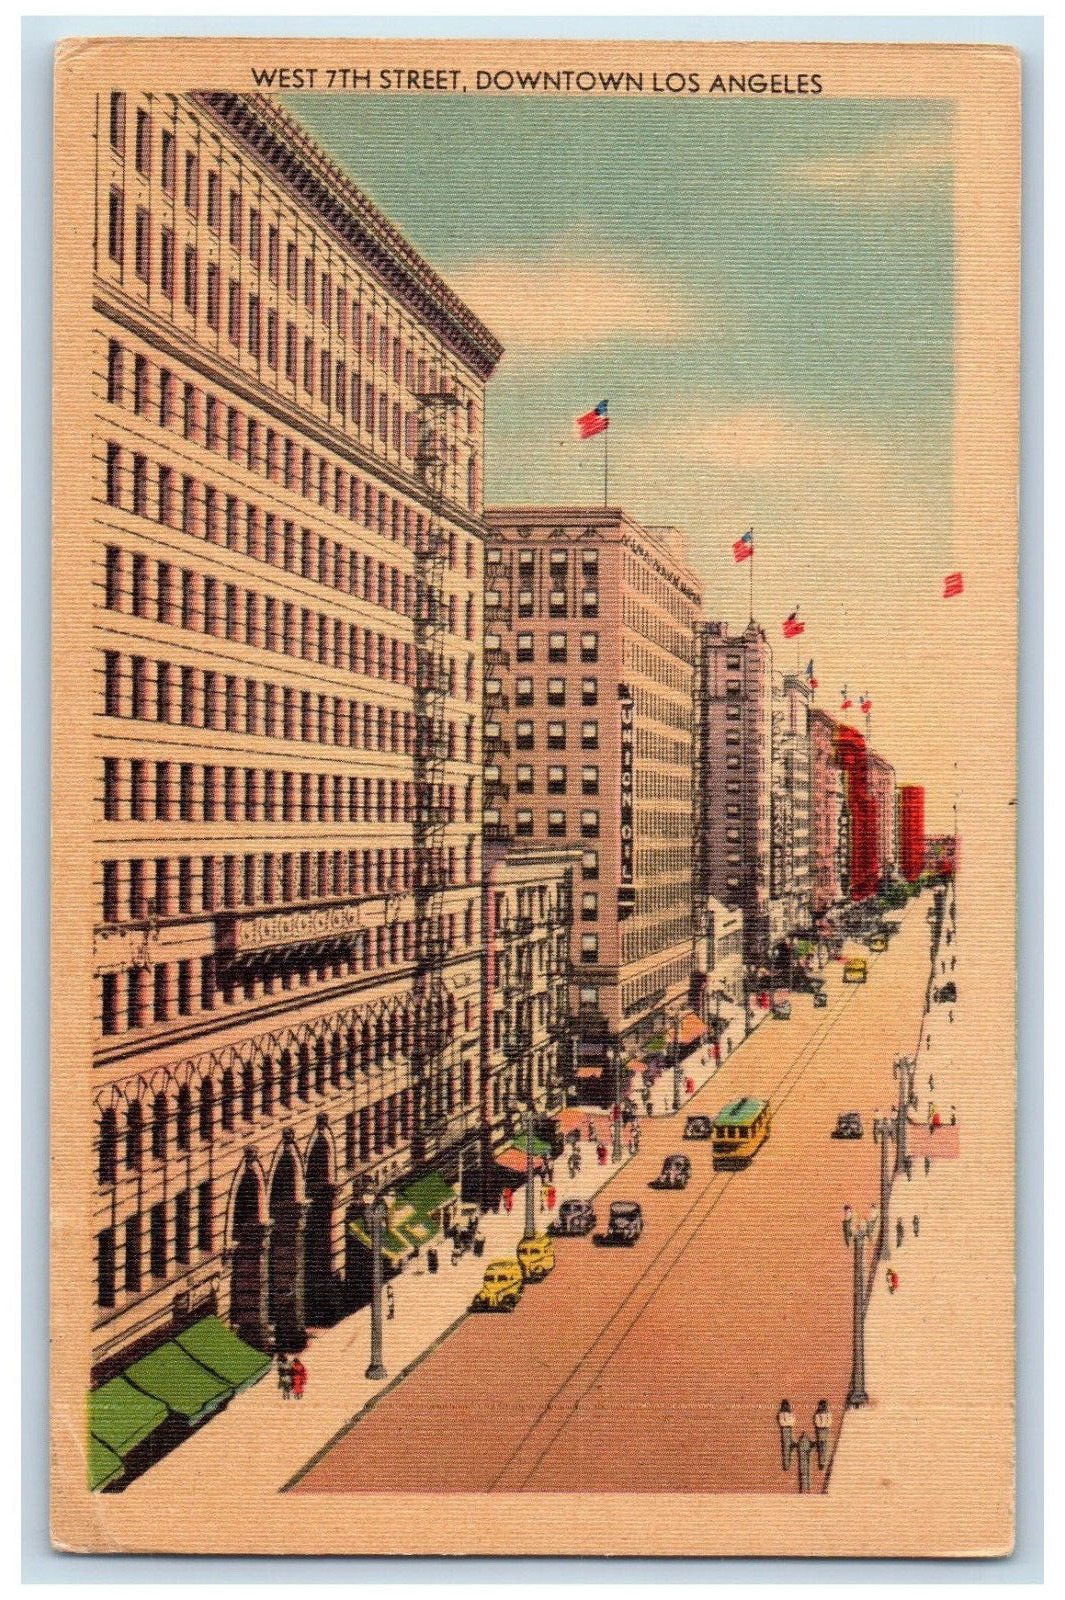 c1940's Office, Stores, West 7th Street, Downtown Los Angeles CA Postcard